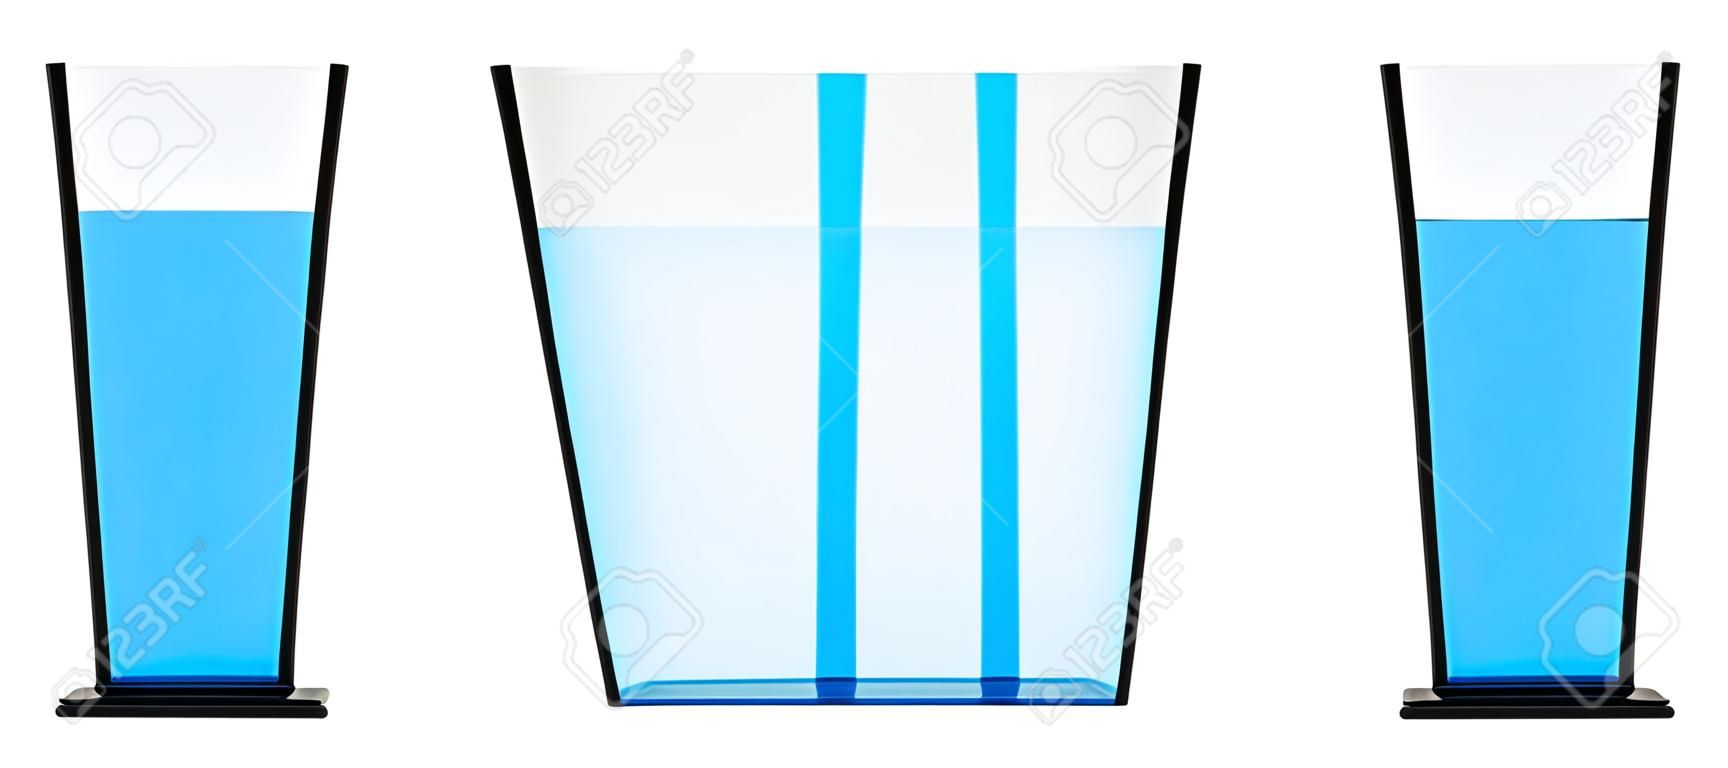 The level of water in a glass of water indicates wisdom and the fulfillment of knowledge.